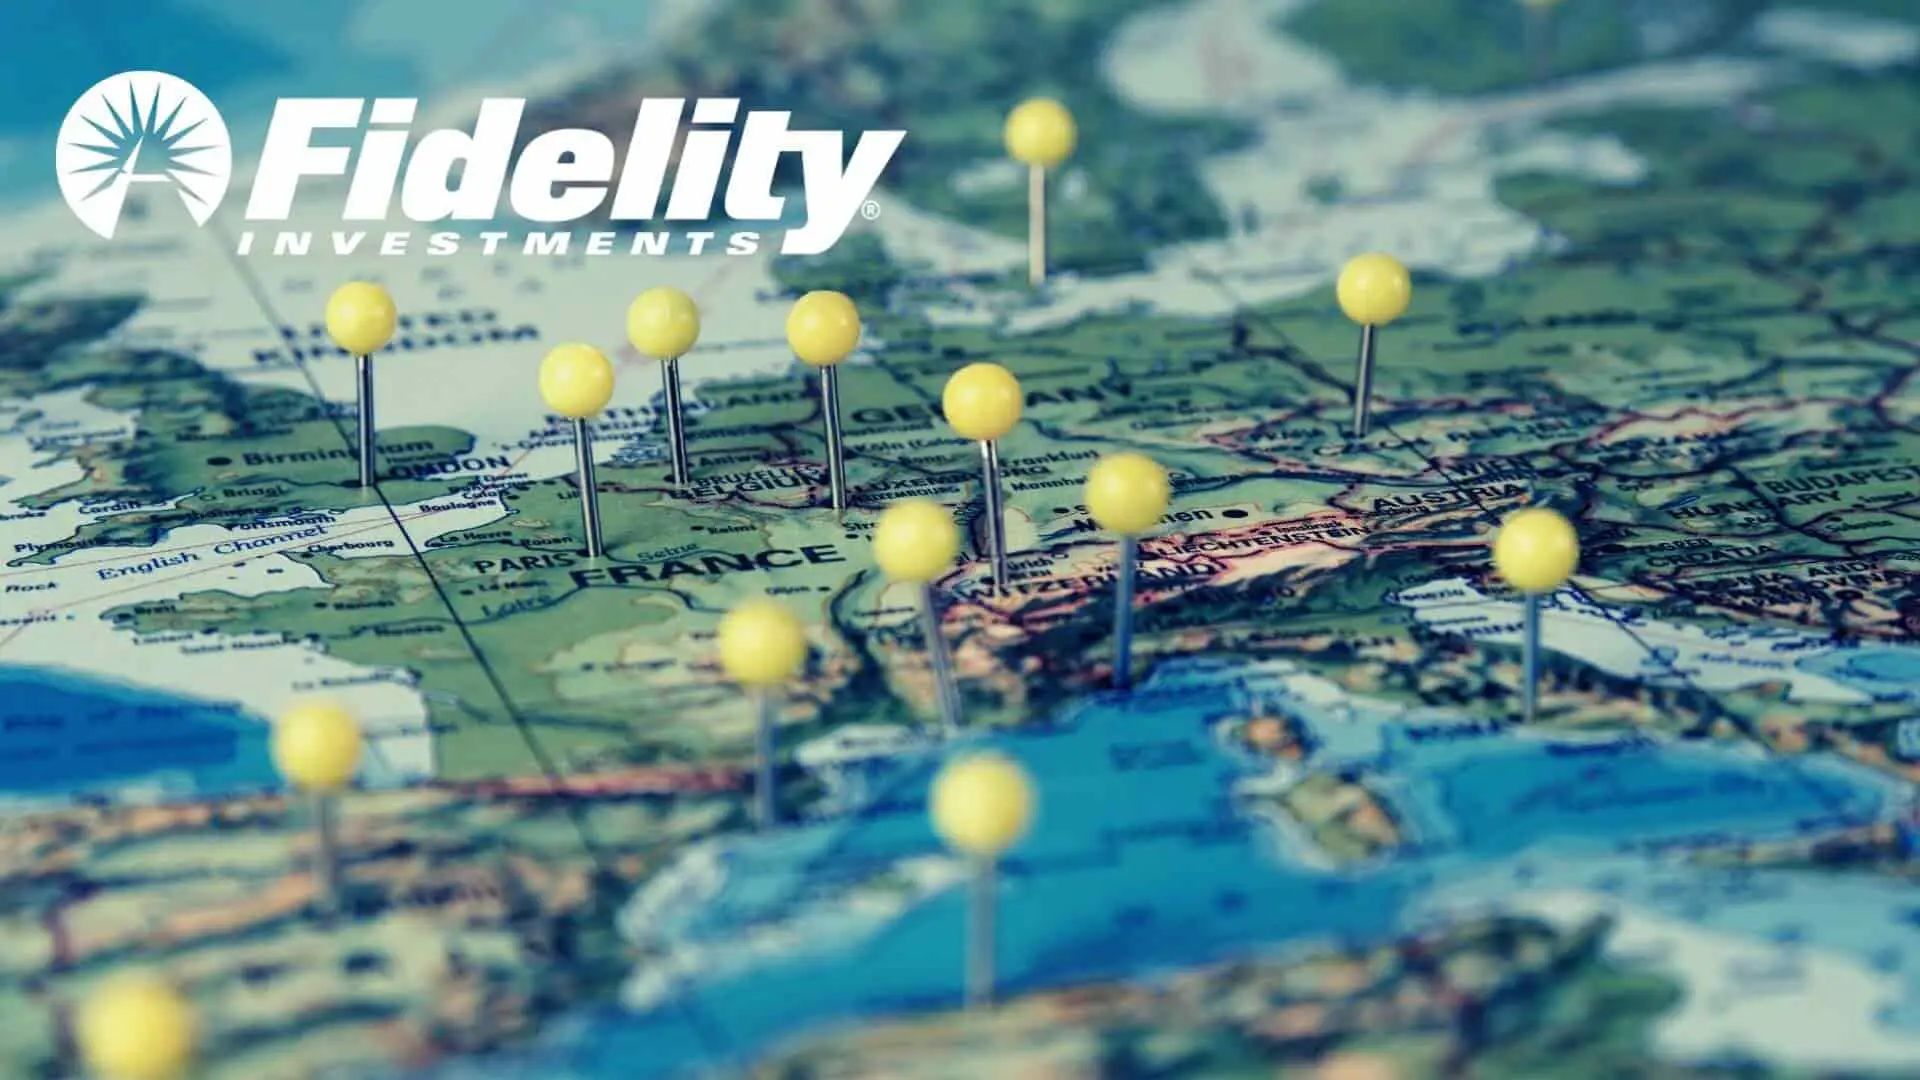 Fidelity launches cryptocurrency business in Europe